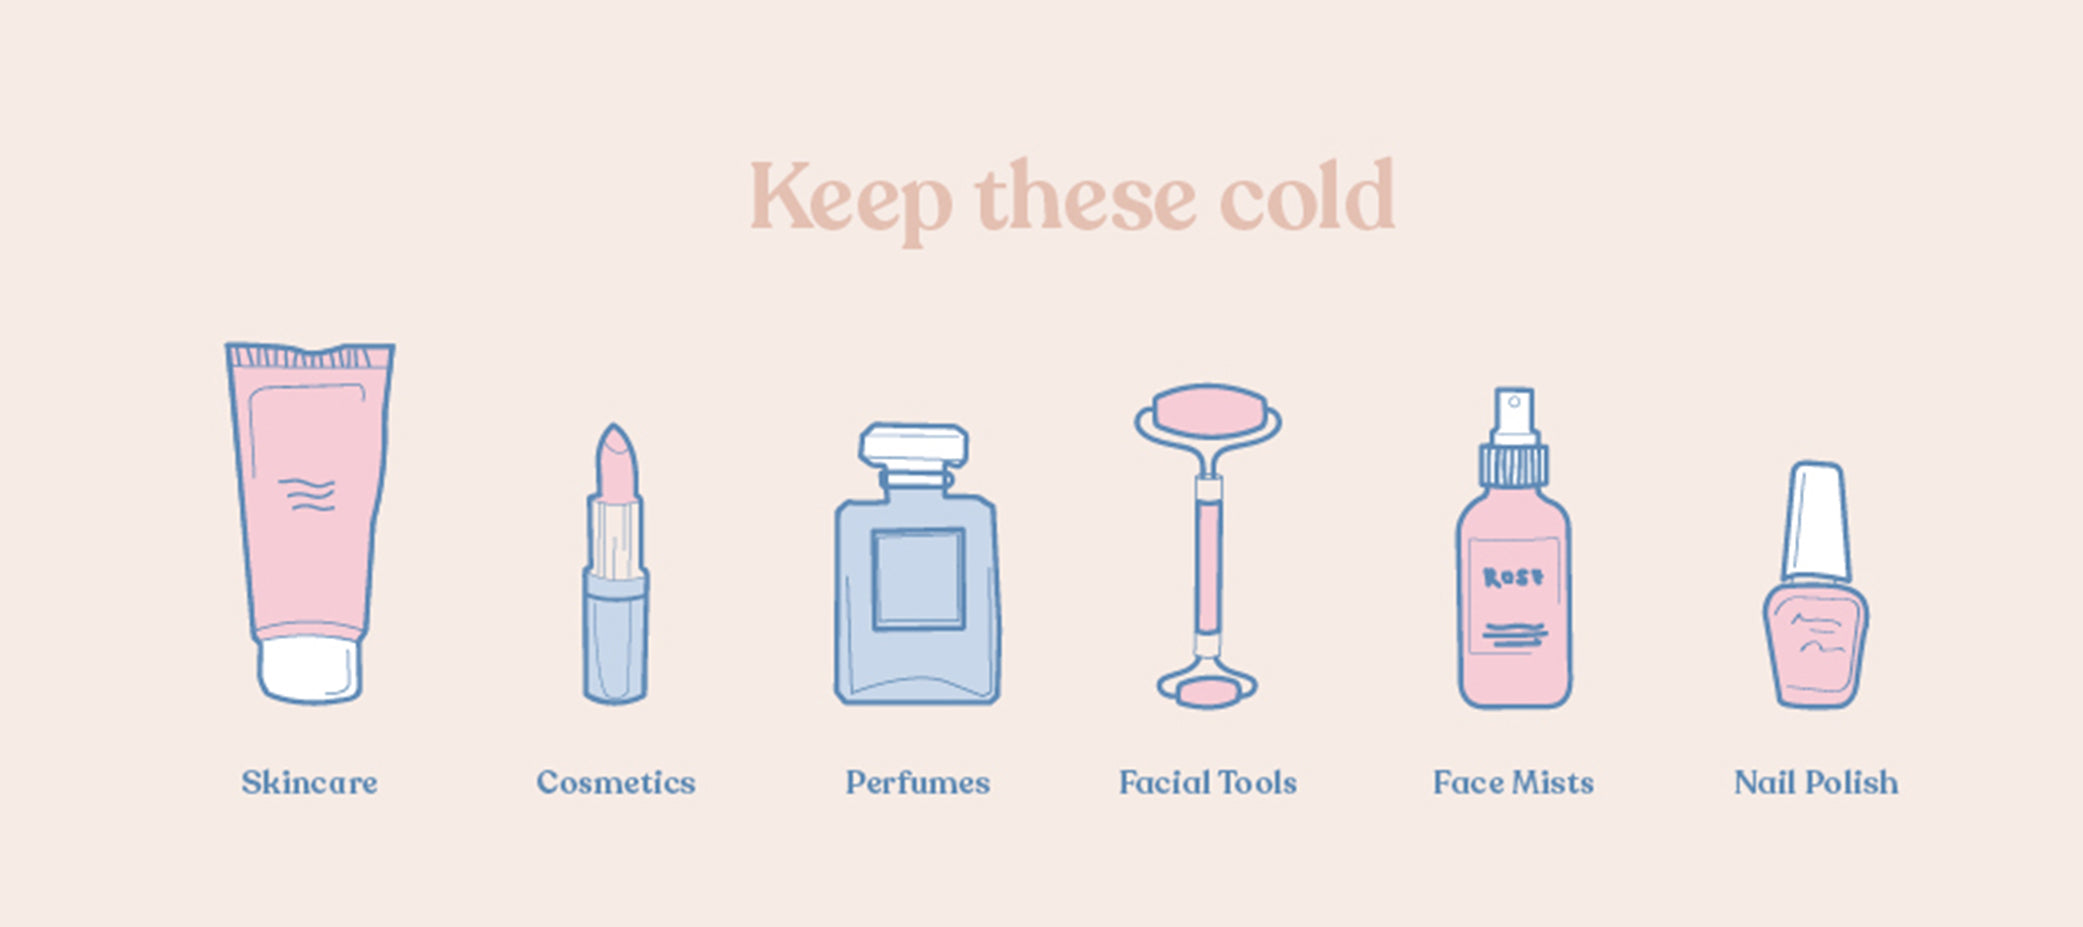 Items that can be stored on the cold setting of your Beauty Fridge